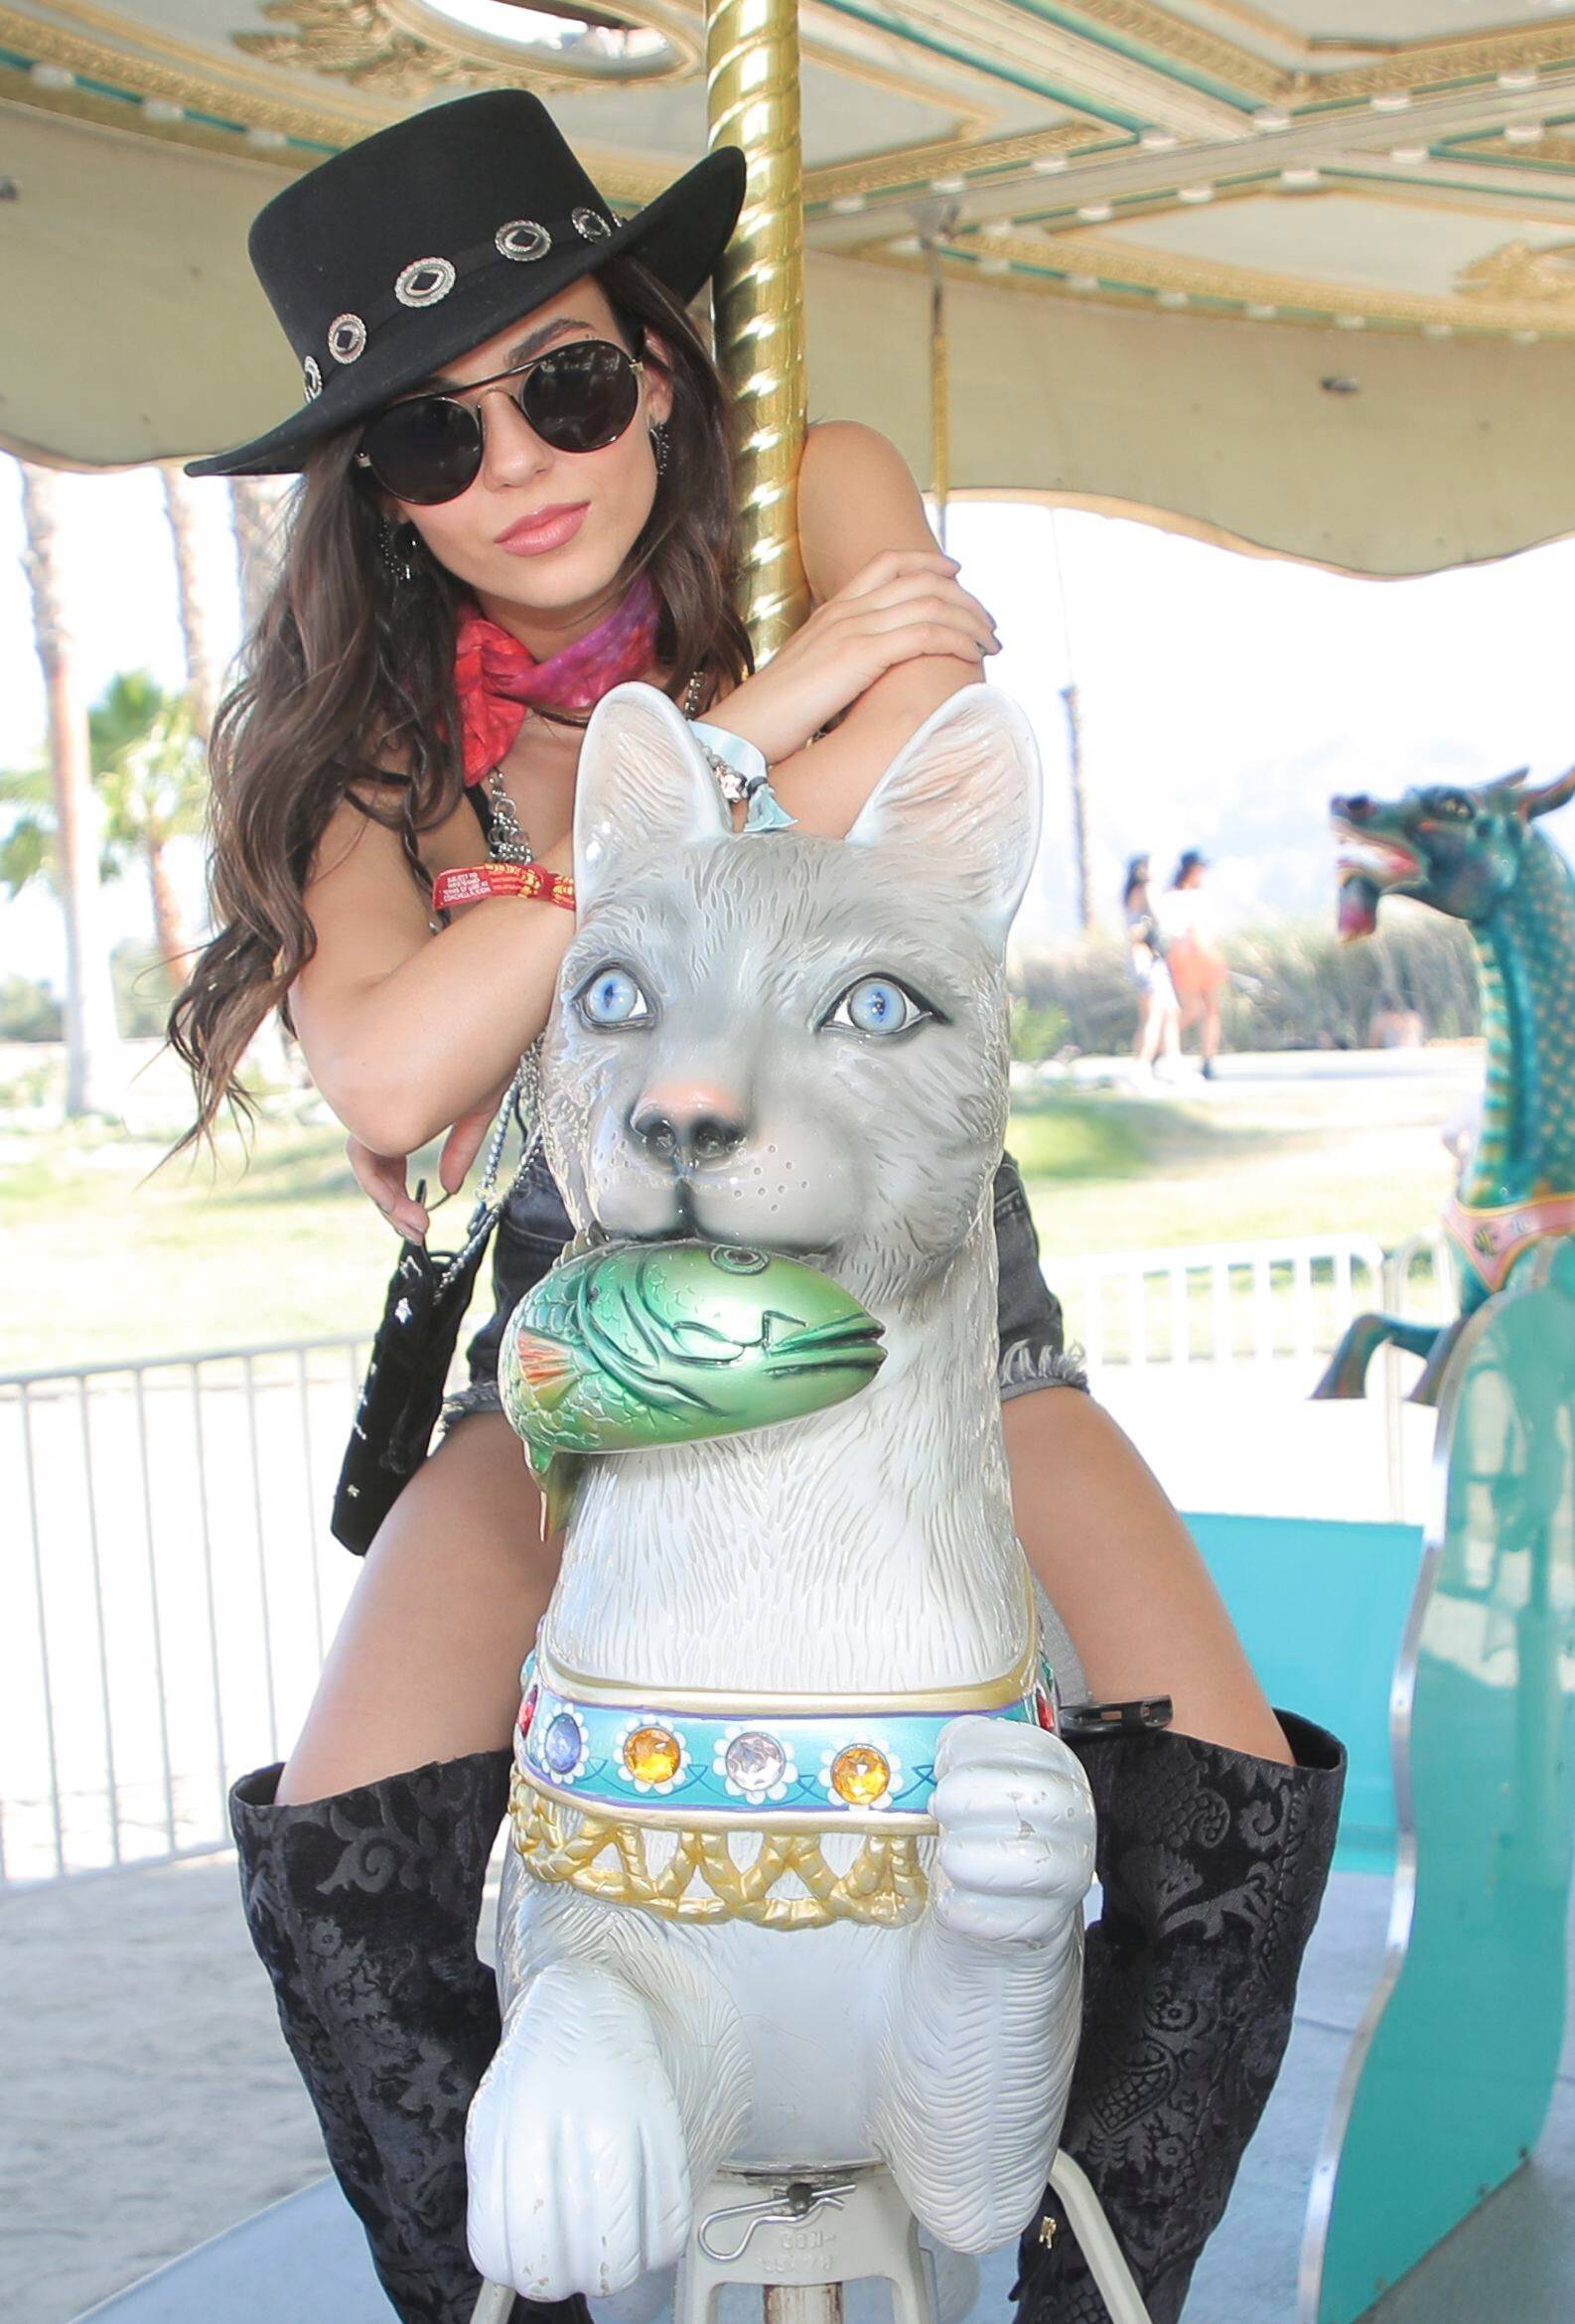 Victoria Justice At Revolve Party Coachella Valley Music And Arts Festival